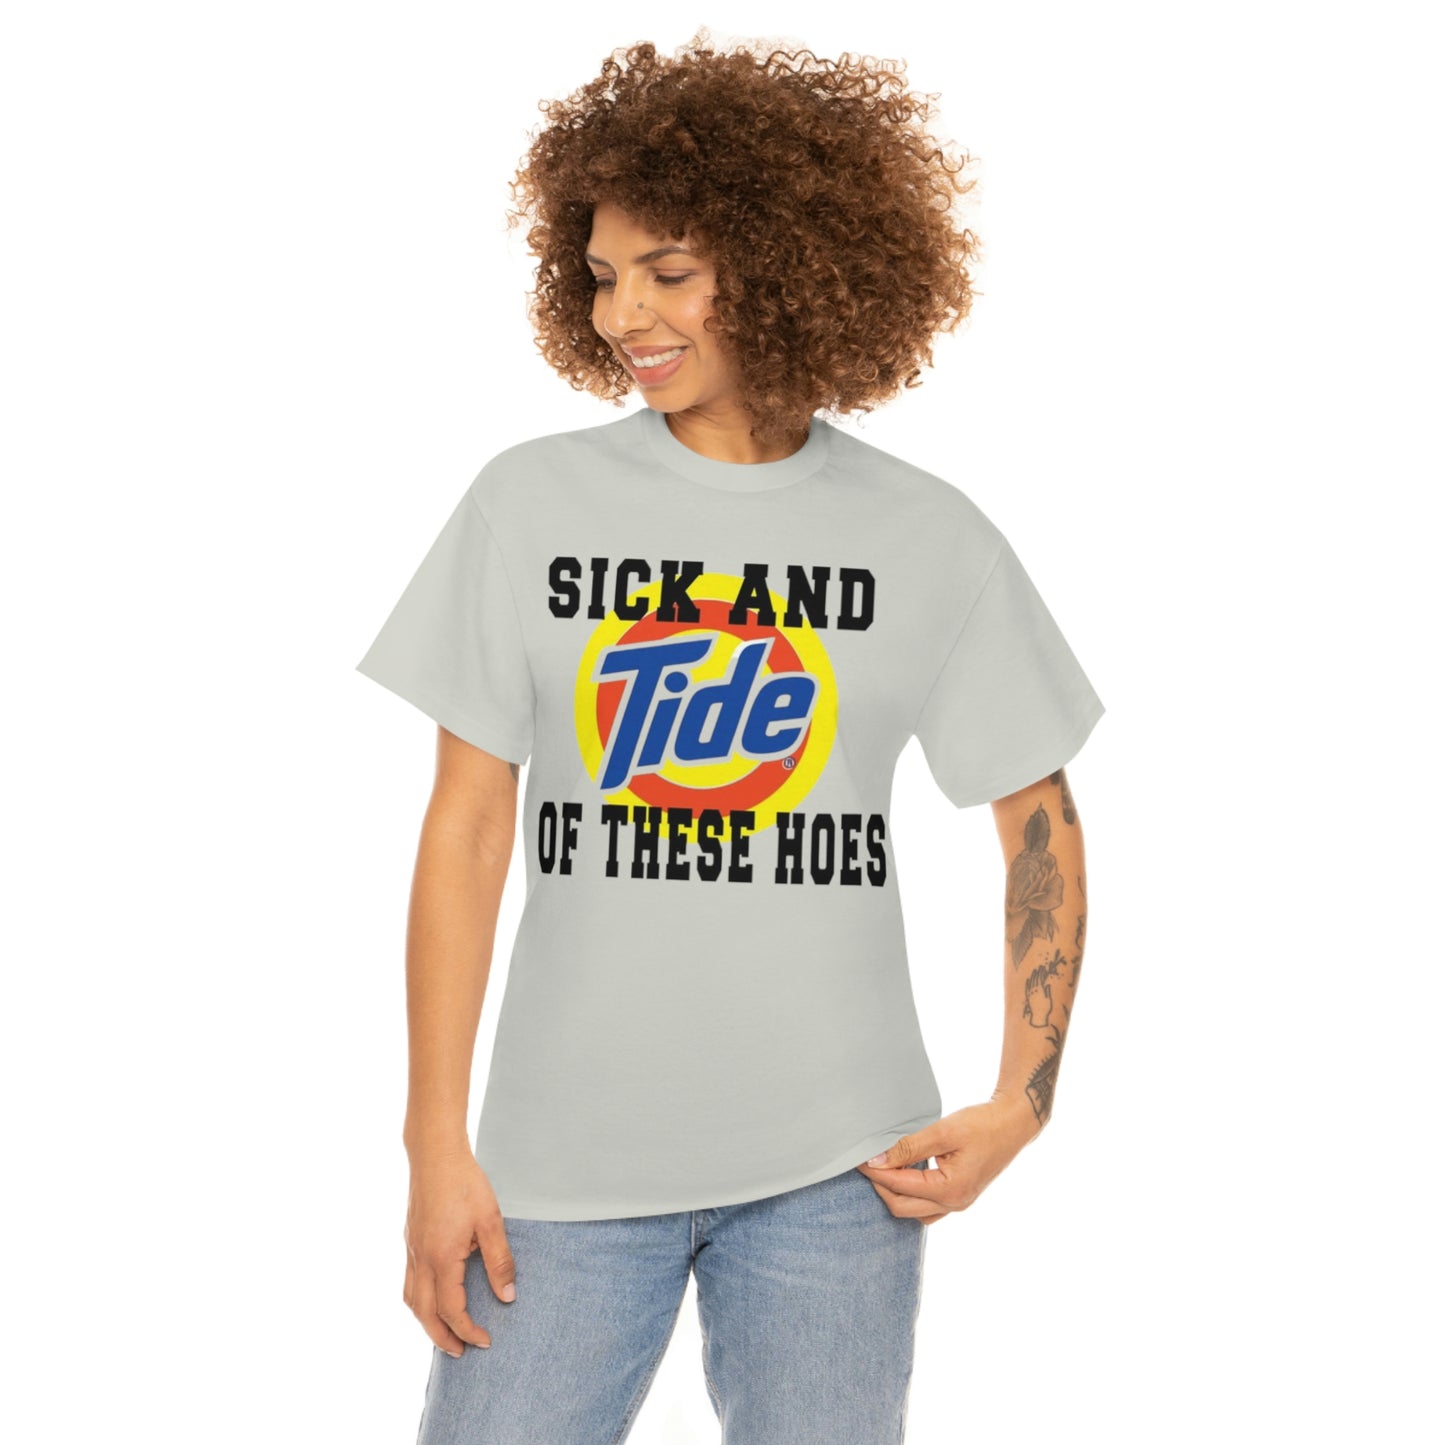 Sick And Tide Tee